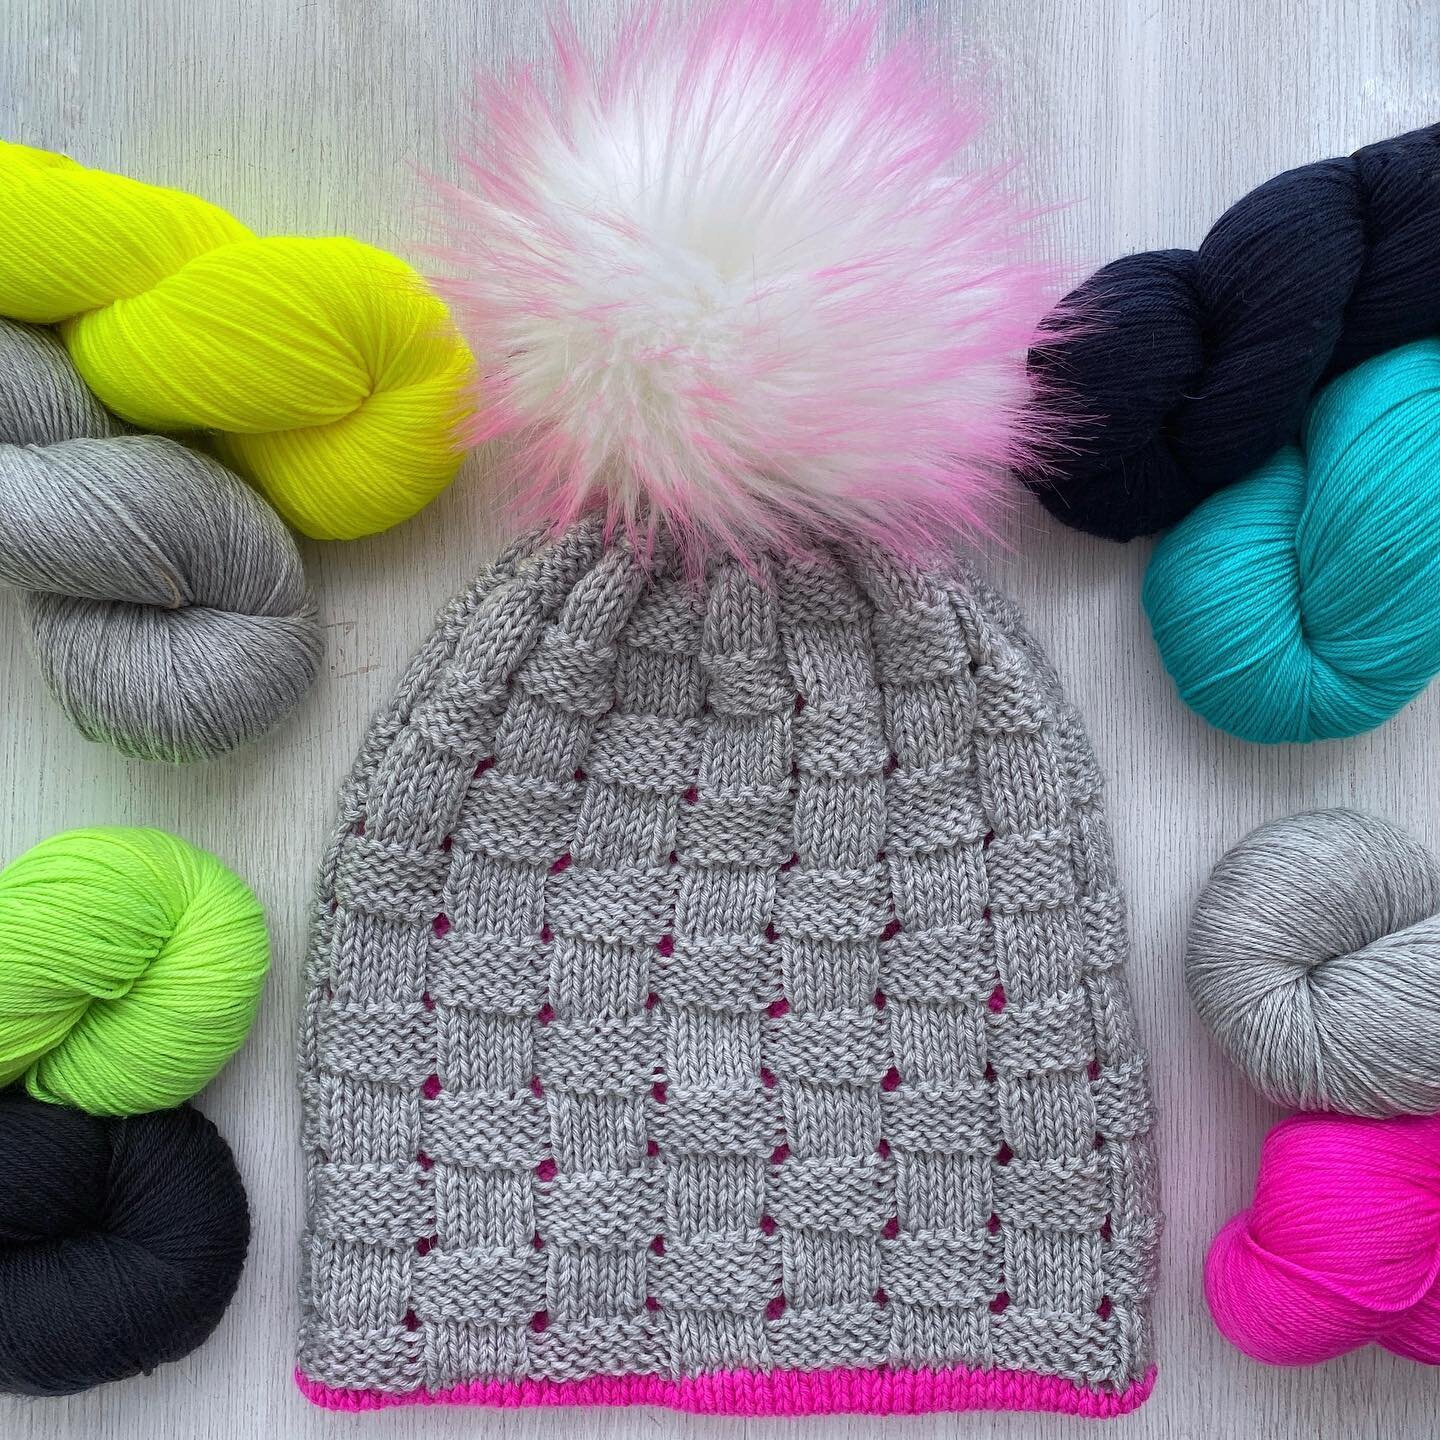 A shipment of Pompoms from @yarnboler arrived the other day!!! Mostly whites with neon tips. They are sooooo pretty! 

We will have hat kits and pompom available at @knitcitycanada Montreal!! 

See you soon!

#leoandroxyyarnco #colourfulyarn #brighty